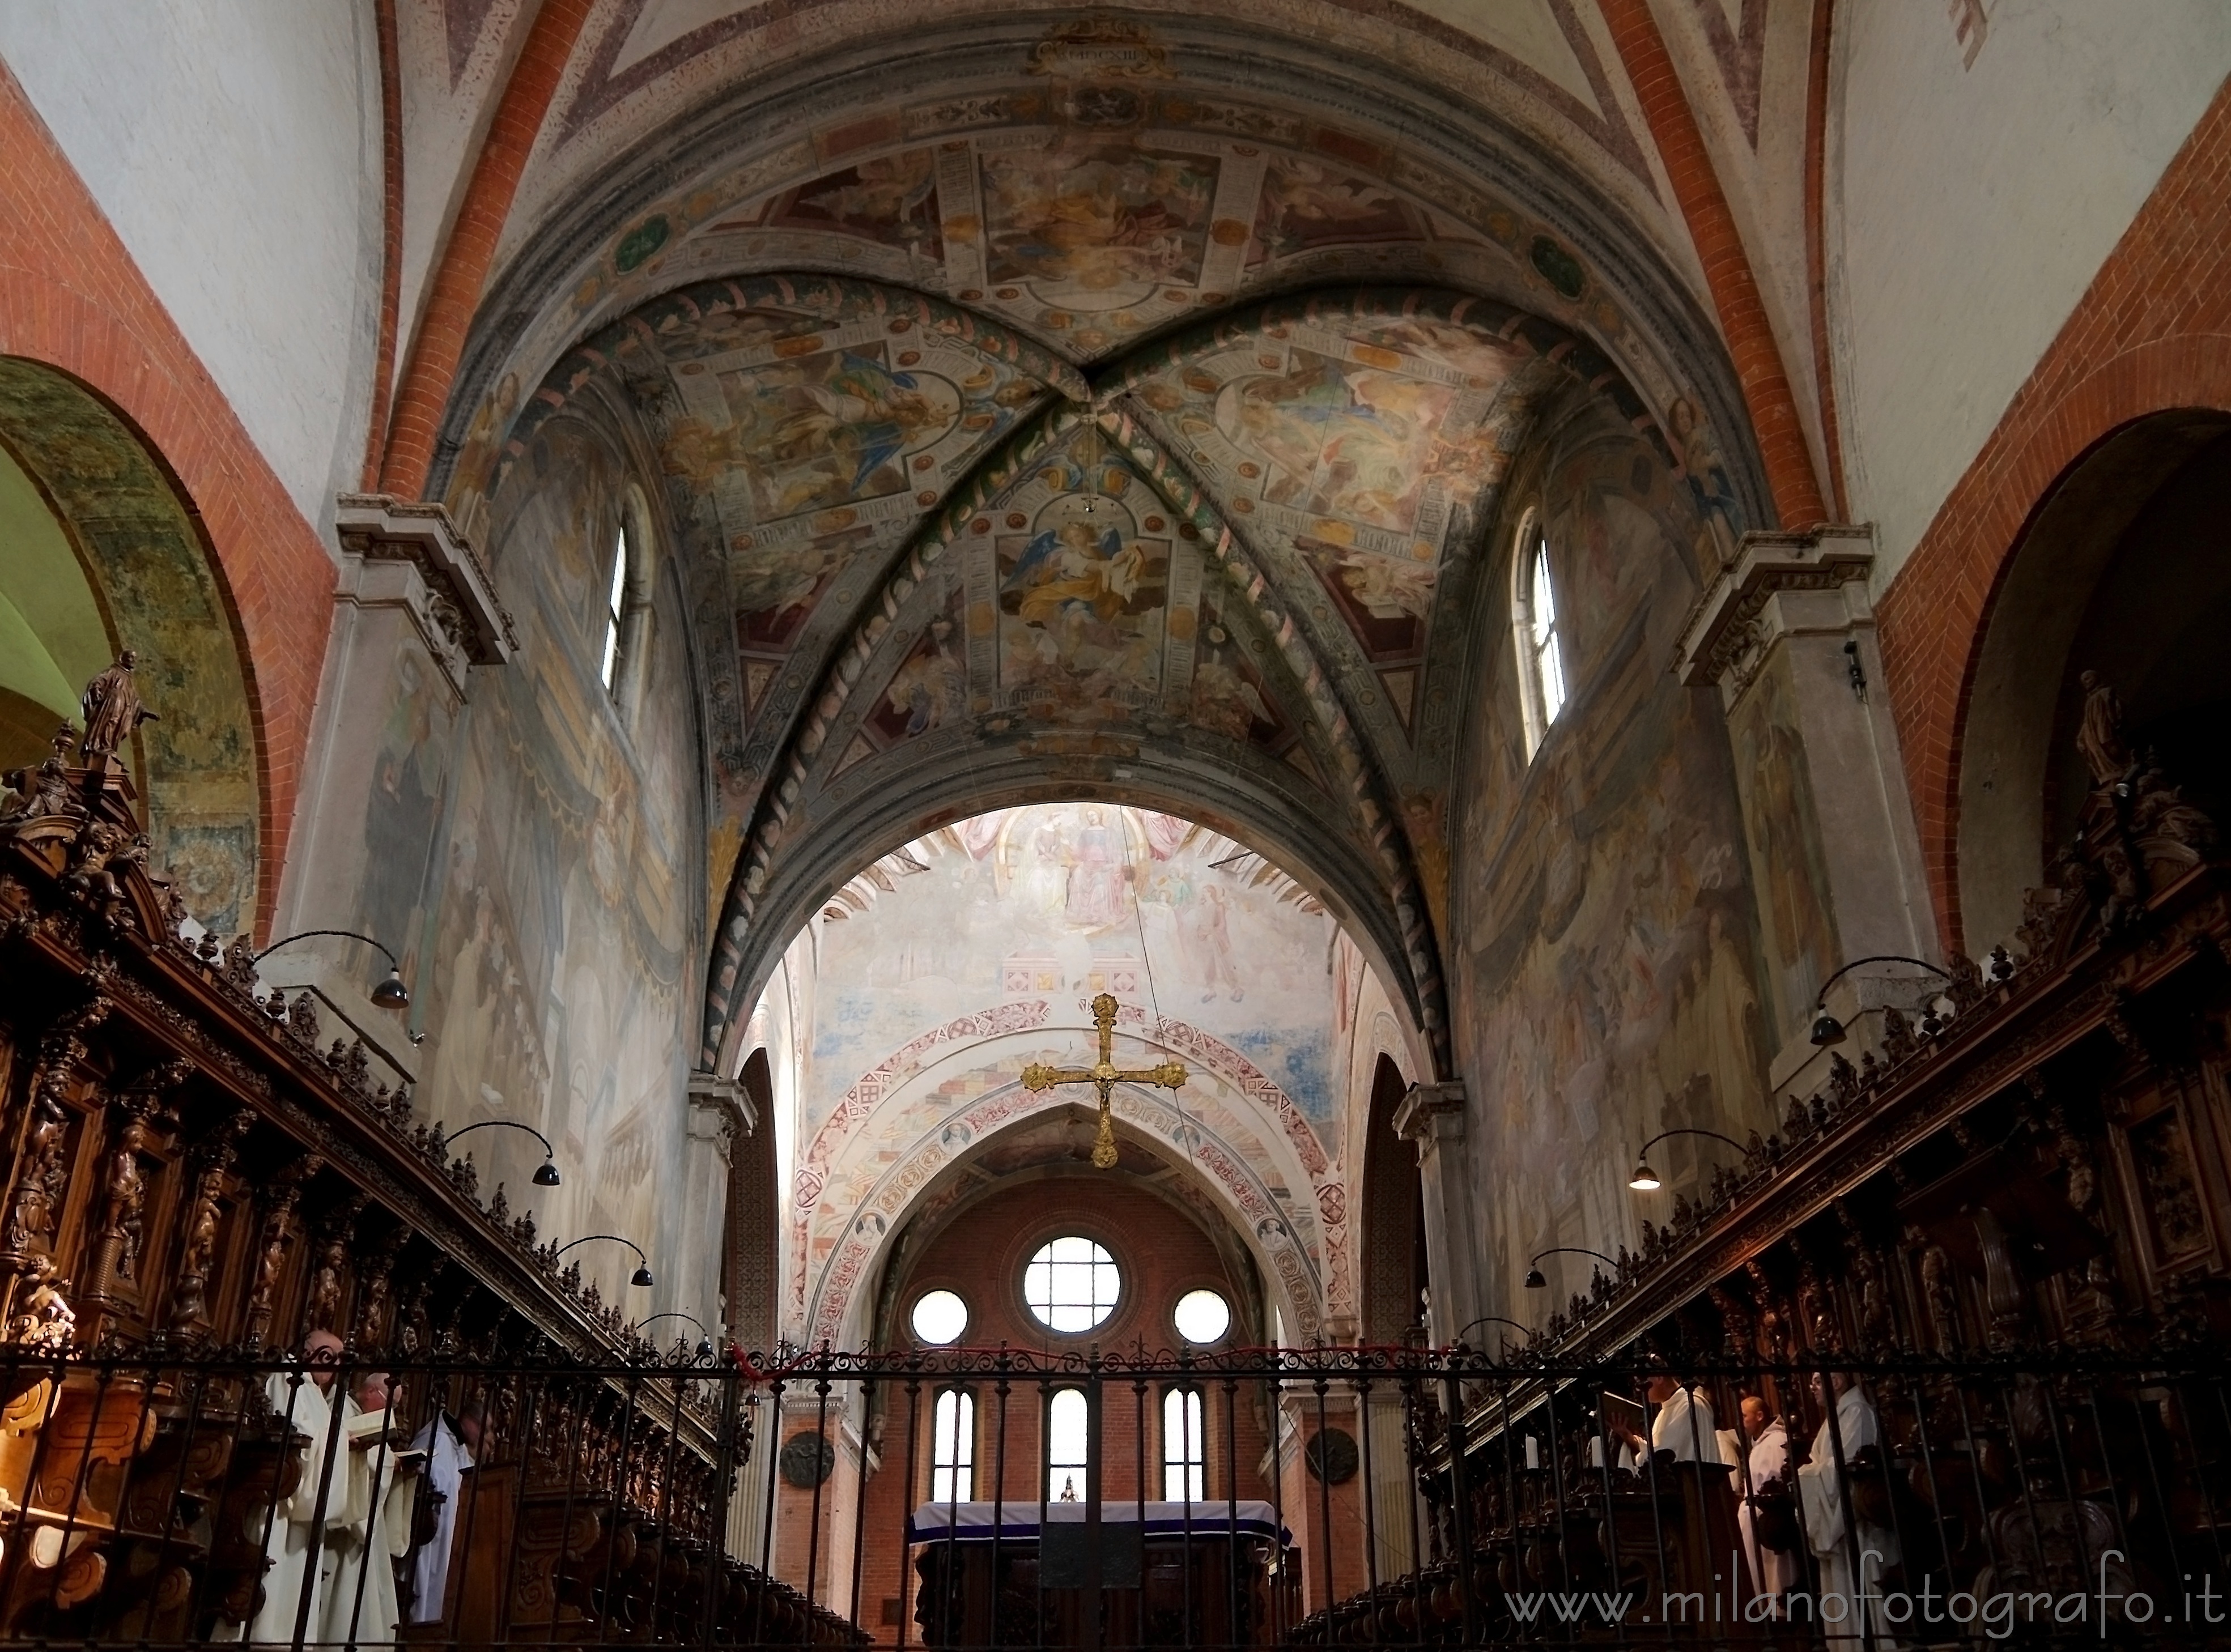 Milan (Italy): Part of the interiors of the Abbey of Chiaravalle - Milan (Italy)